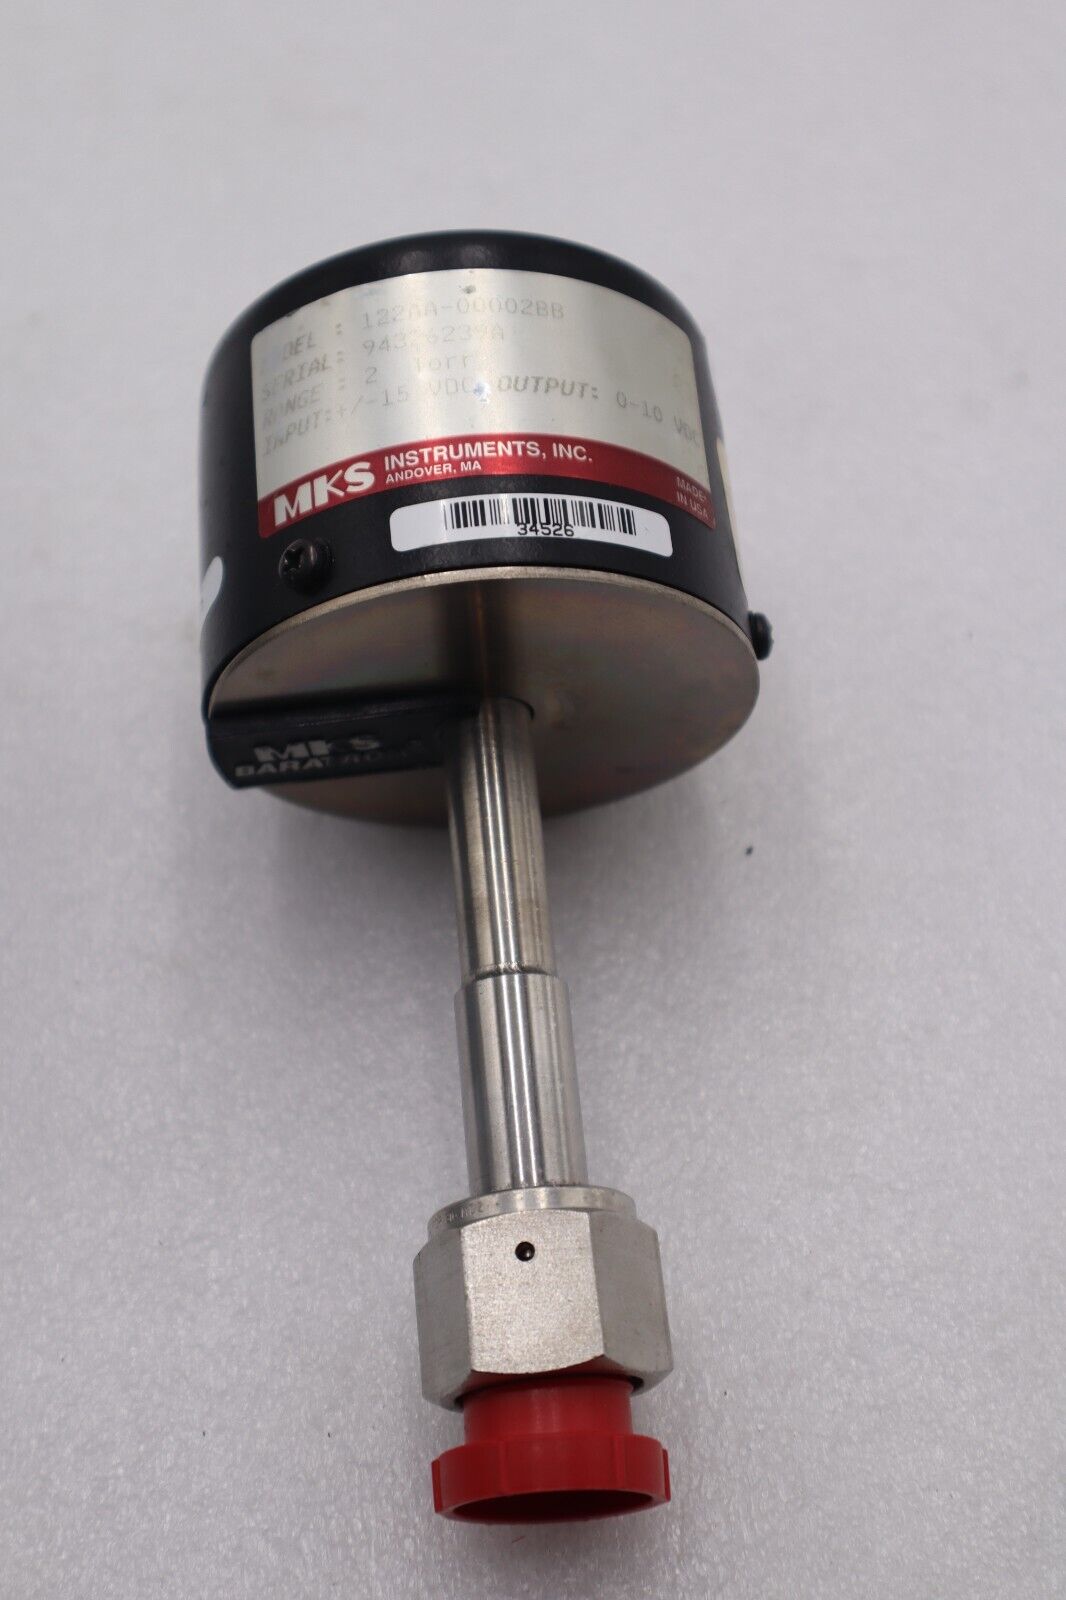 MKS INSTRUMENTS 122AA-00002BB PRESSURE TRANSDUCER TYPE 122A STOCK #K-1204A